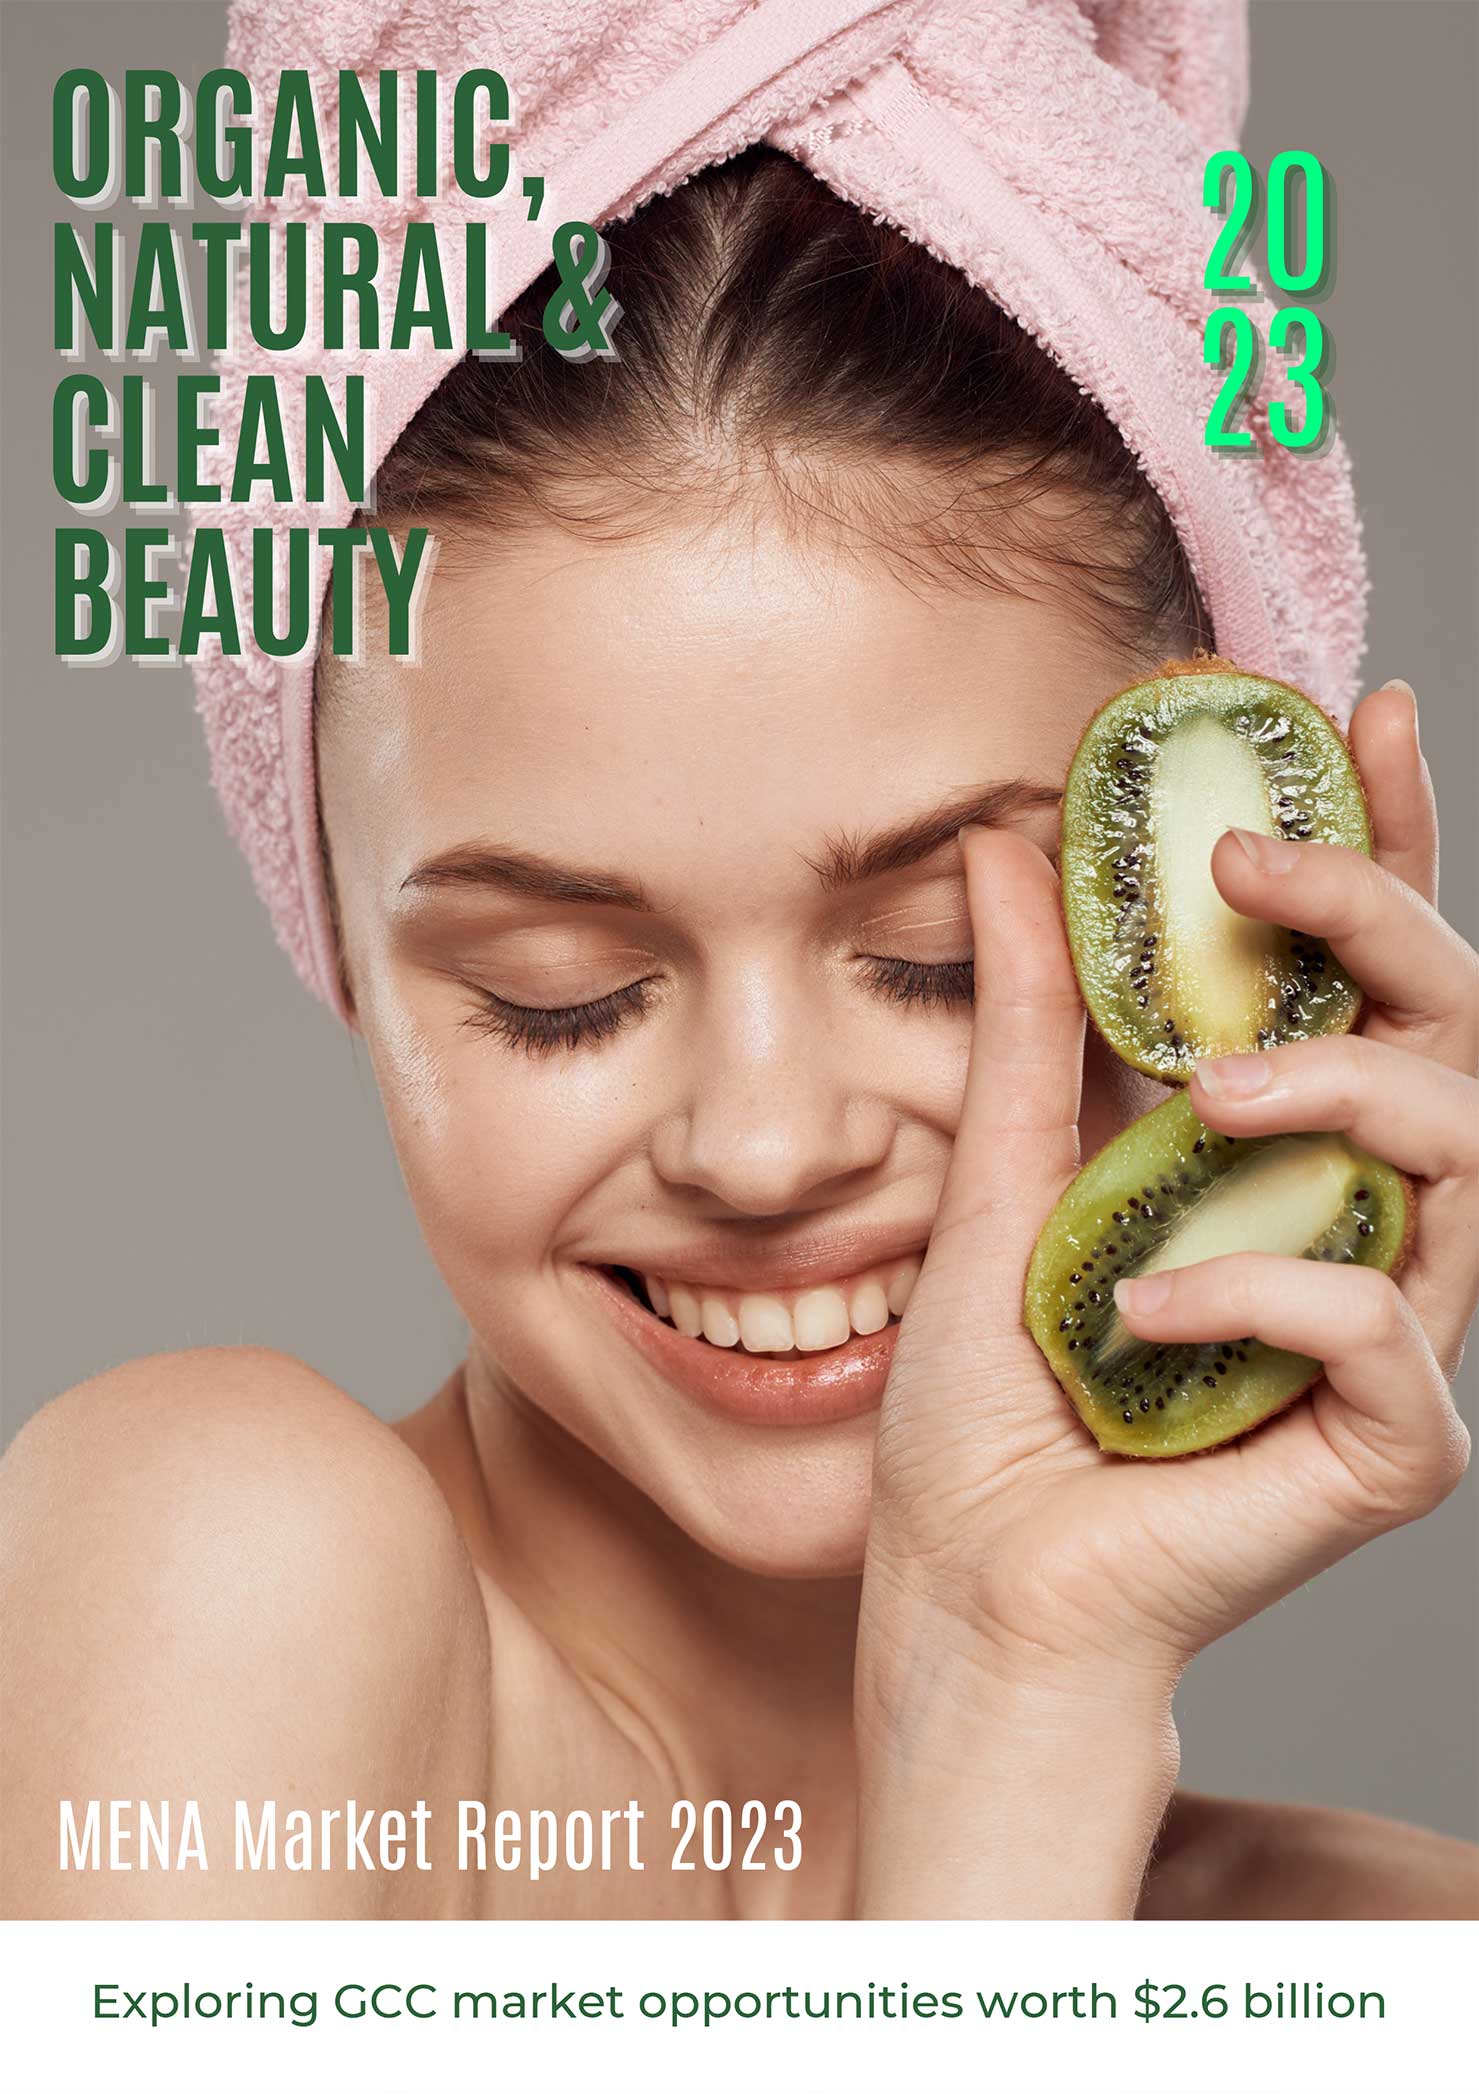 beauty products market 2023 1